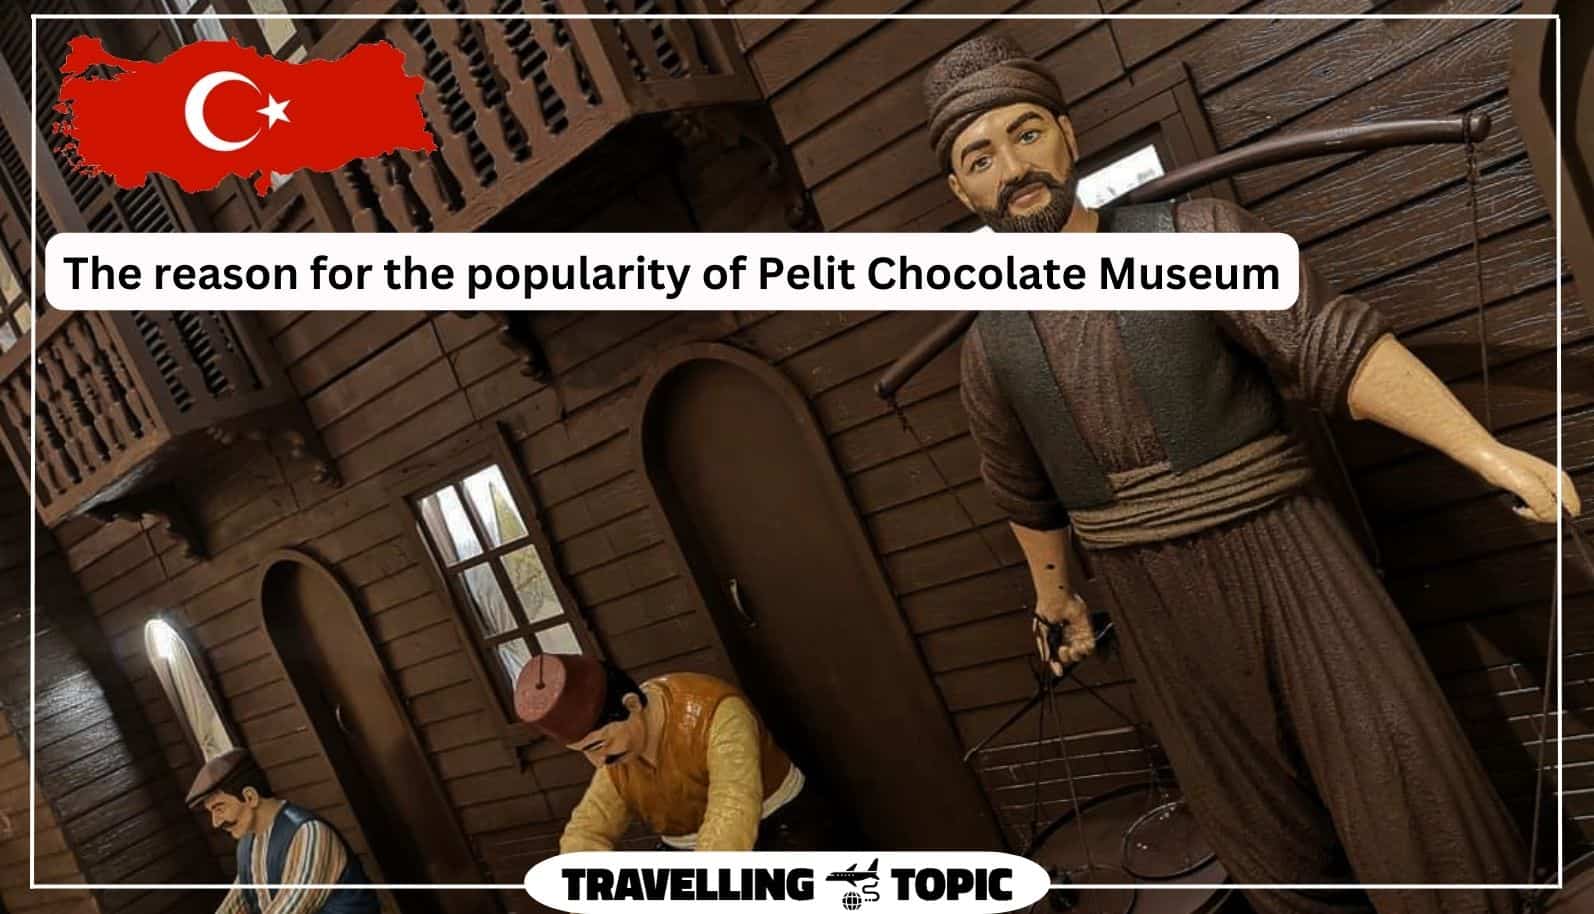 The reason for the popularity of Pelit Chocolate Museum